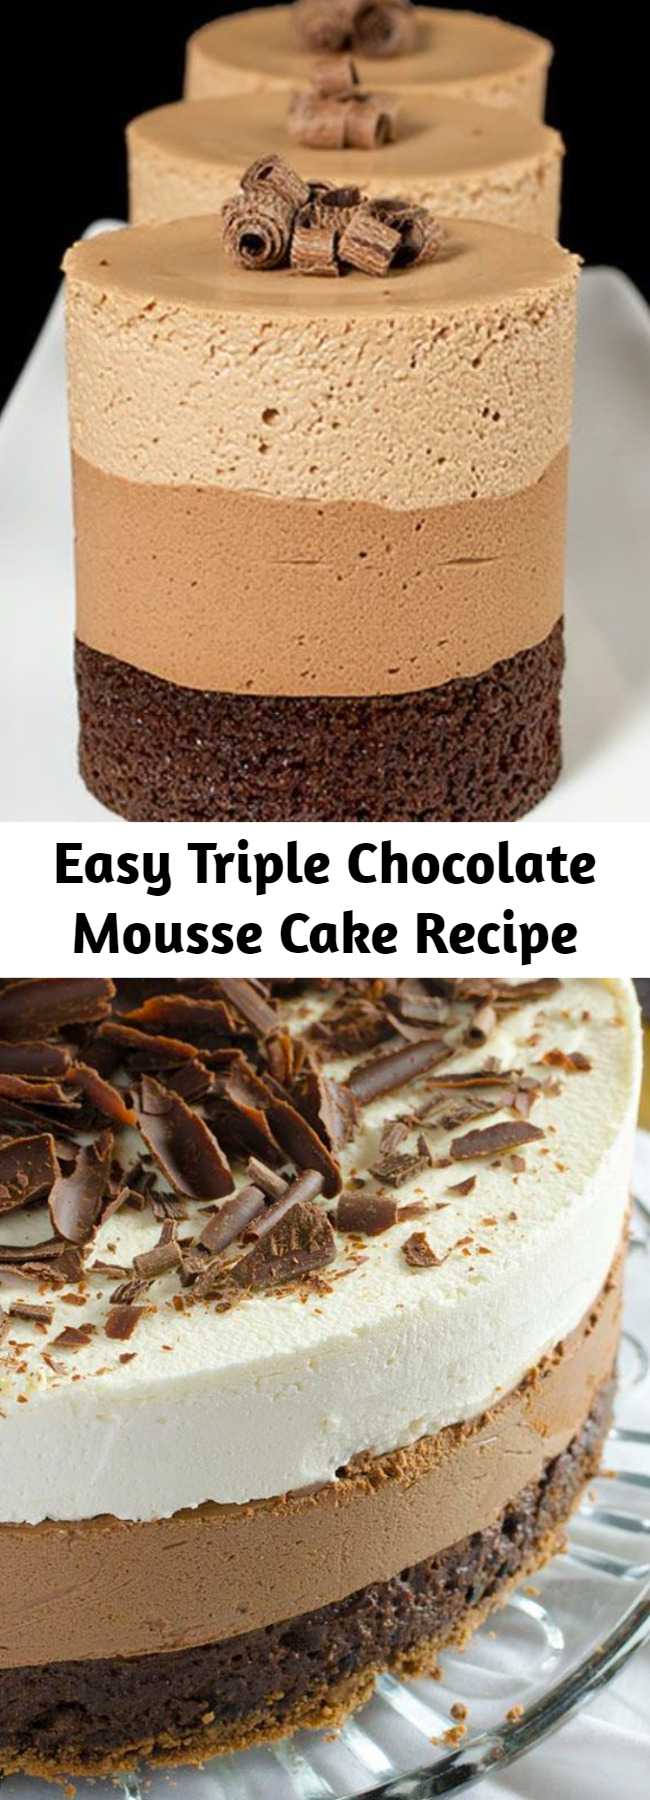 Easy Triple Chocolate Mousse Cake Recipe - What if your chocolate cake has three chocolate layers instead of one? Then, we are talking about one of the most decadent chocolate cakes – Triple Chocolate Mousse Cake.